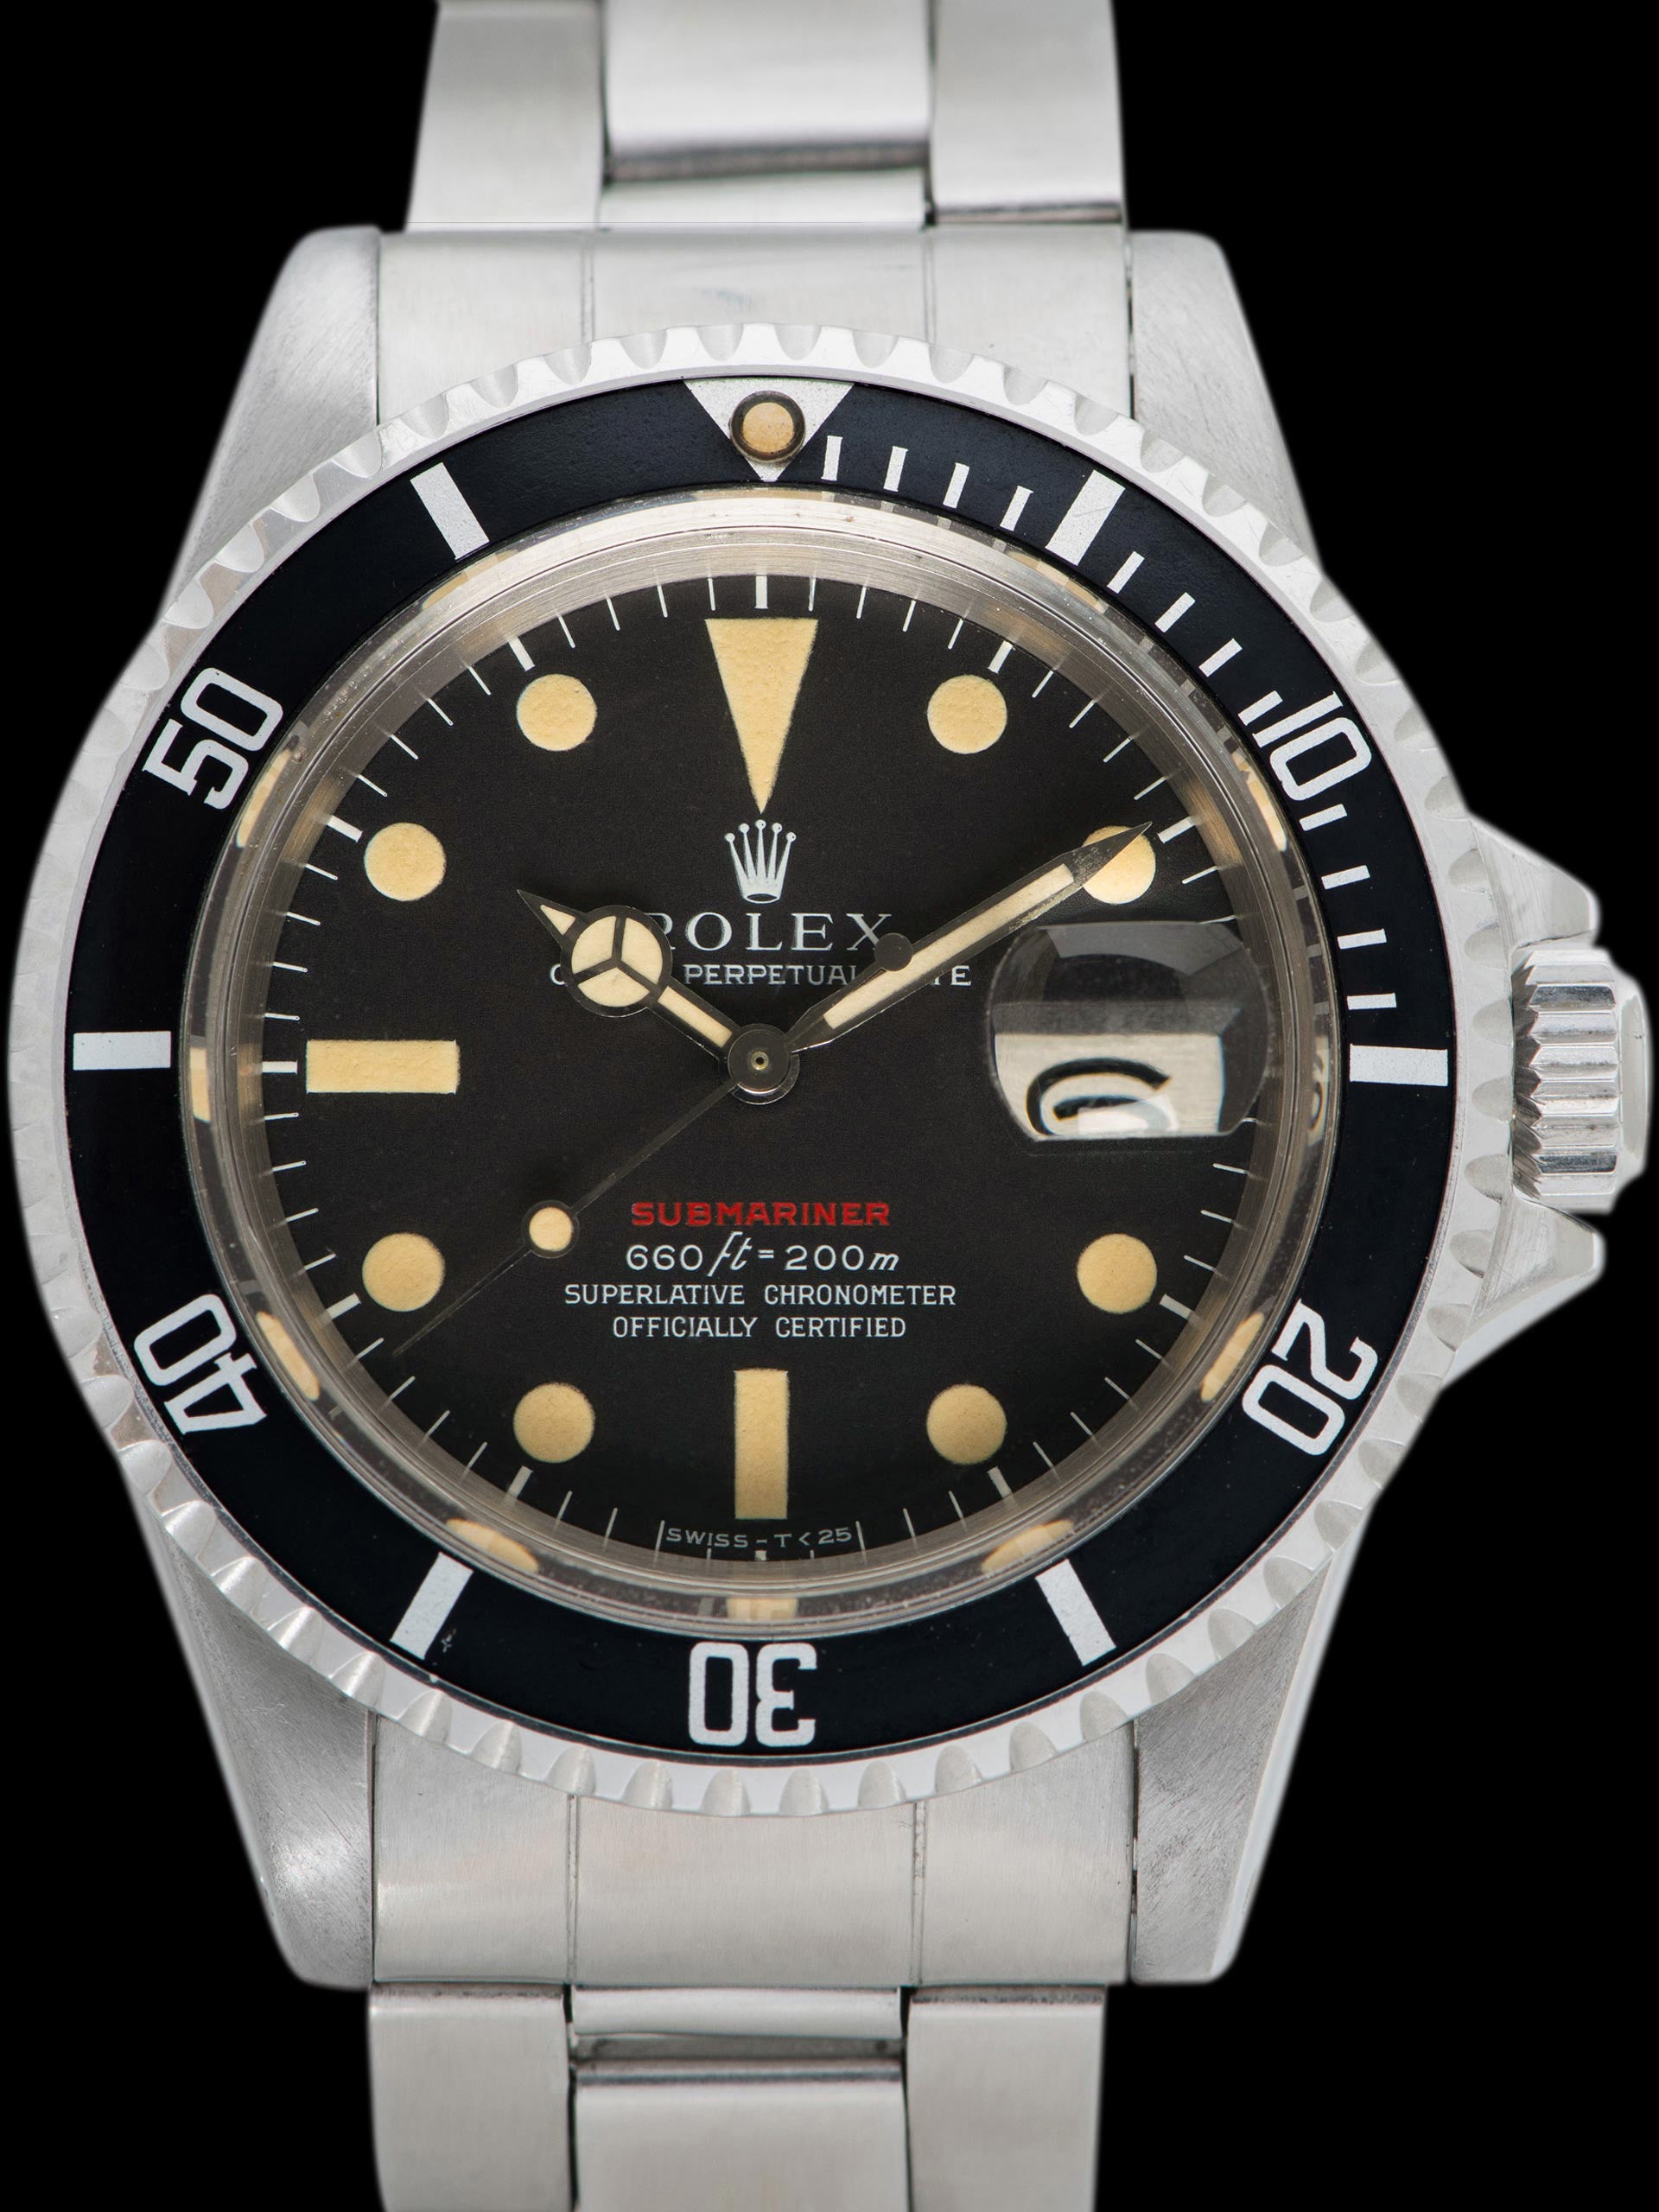 1970 Rolex Red Submariner (Ref. 1680) "Mk. IV" W/ Box & Papers